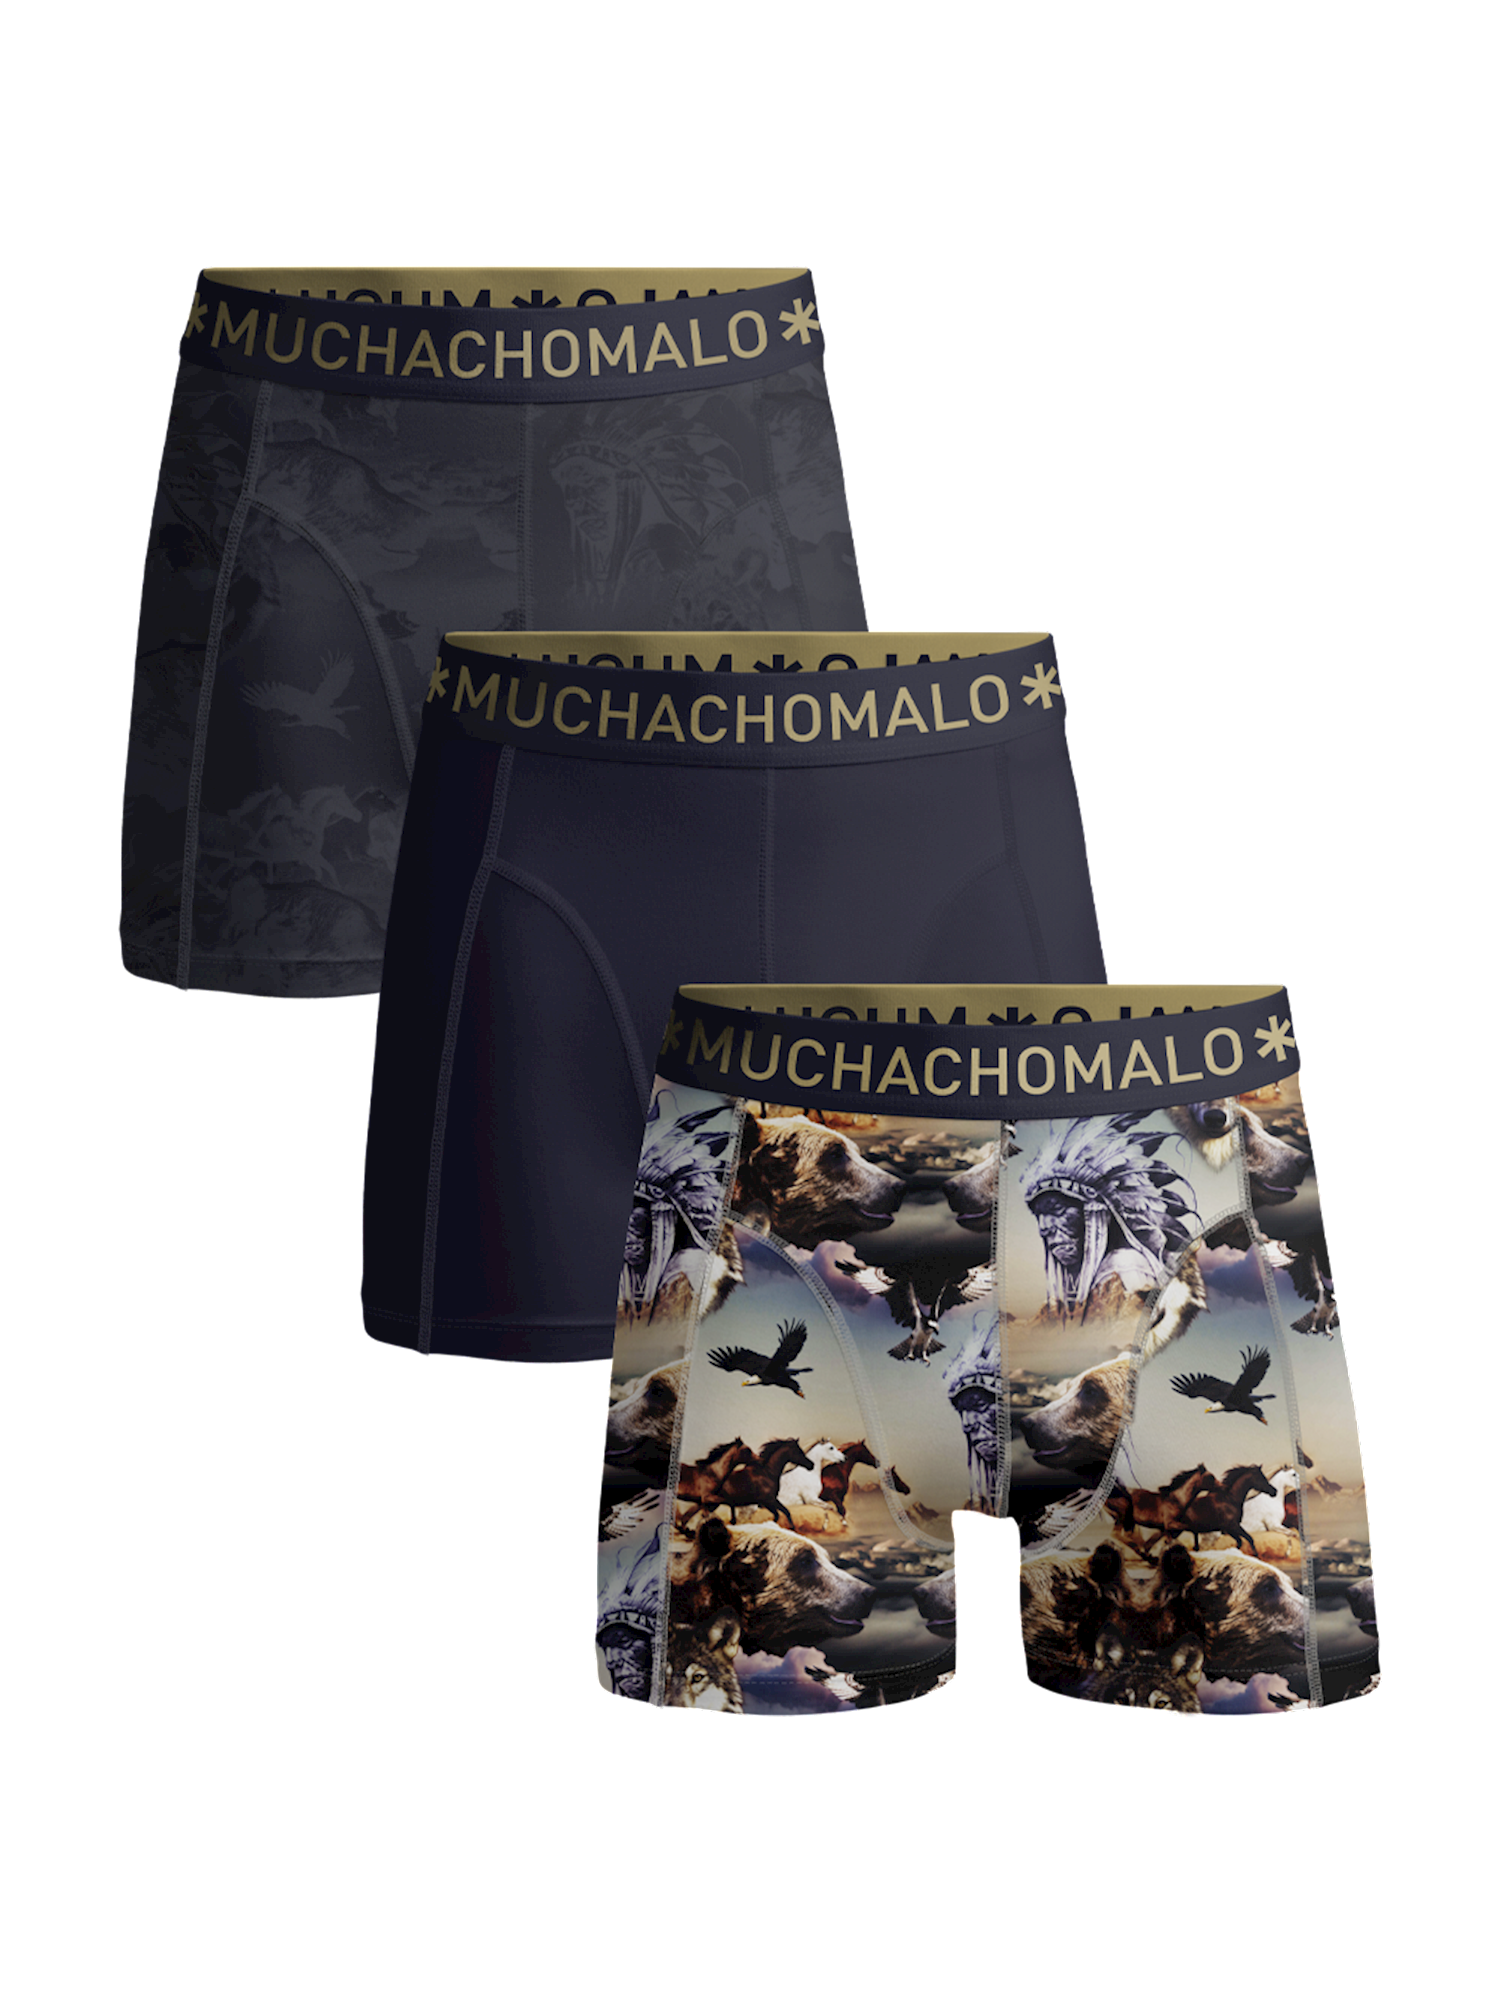 For more than 15 years, Muchachomalo has been shaking up the fashion world with men's underwear that is just a little different. We are here for men who listen to the voice telling them to live, hold their heads high and trust who they are. And also for the men who don't know yet that there is an inner bad boy in them. And we know very well that this involves certain quality requirements. You demand a lot from yourself and you are also critical of what you buy. No hay problema! Muchachomalo traditionally combines a relaxed vibe with a dose of self-assurance that typifies the man with the inner bad boy. And all this in a qualitative way, because we offer you underpants that you really feel good in. Every day again. From size S to XXXL for the hombre pequeño to the gran papi. And always of premium quality cotton with 10% elastane for the perfect fit and an eye for the planet.